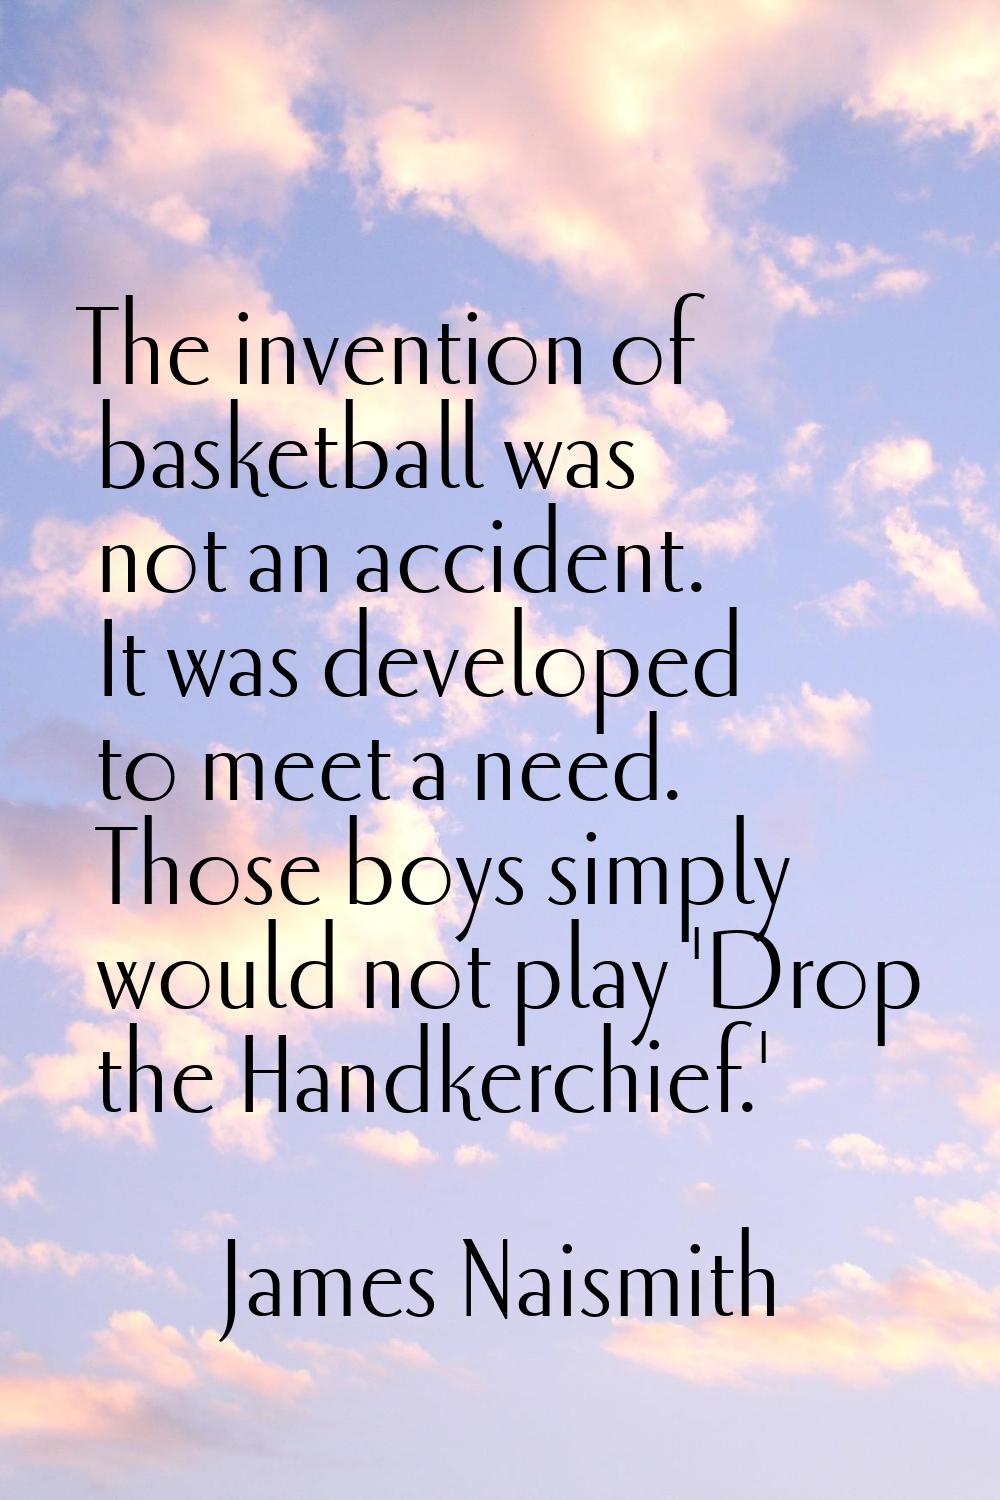 The invention of basketball was not an accident. It was developed to meet a need. Those boys simply